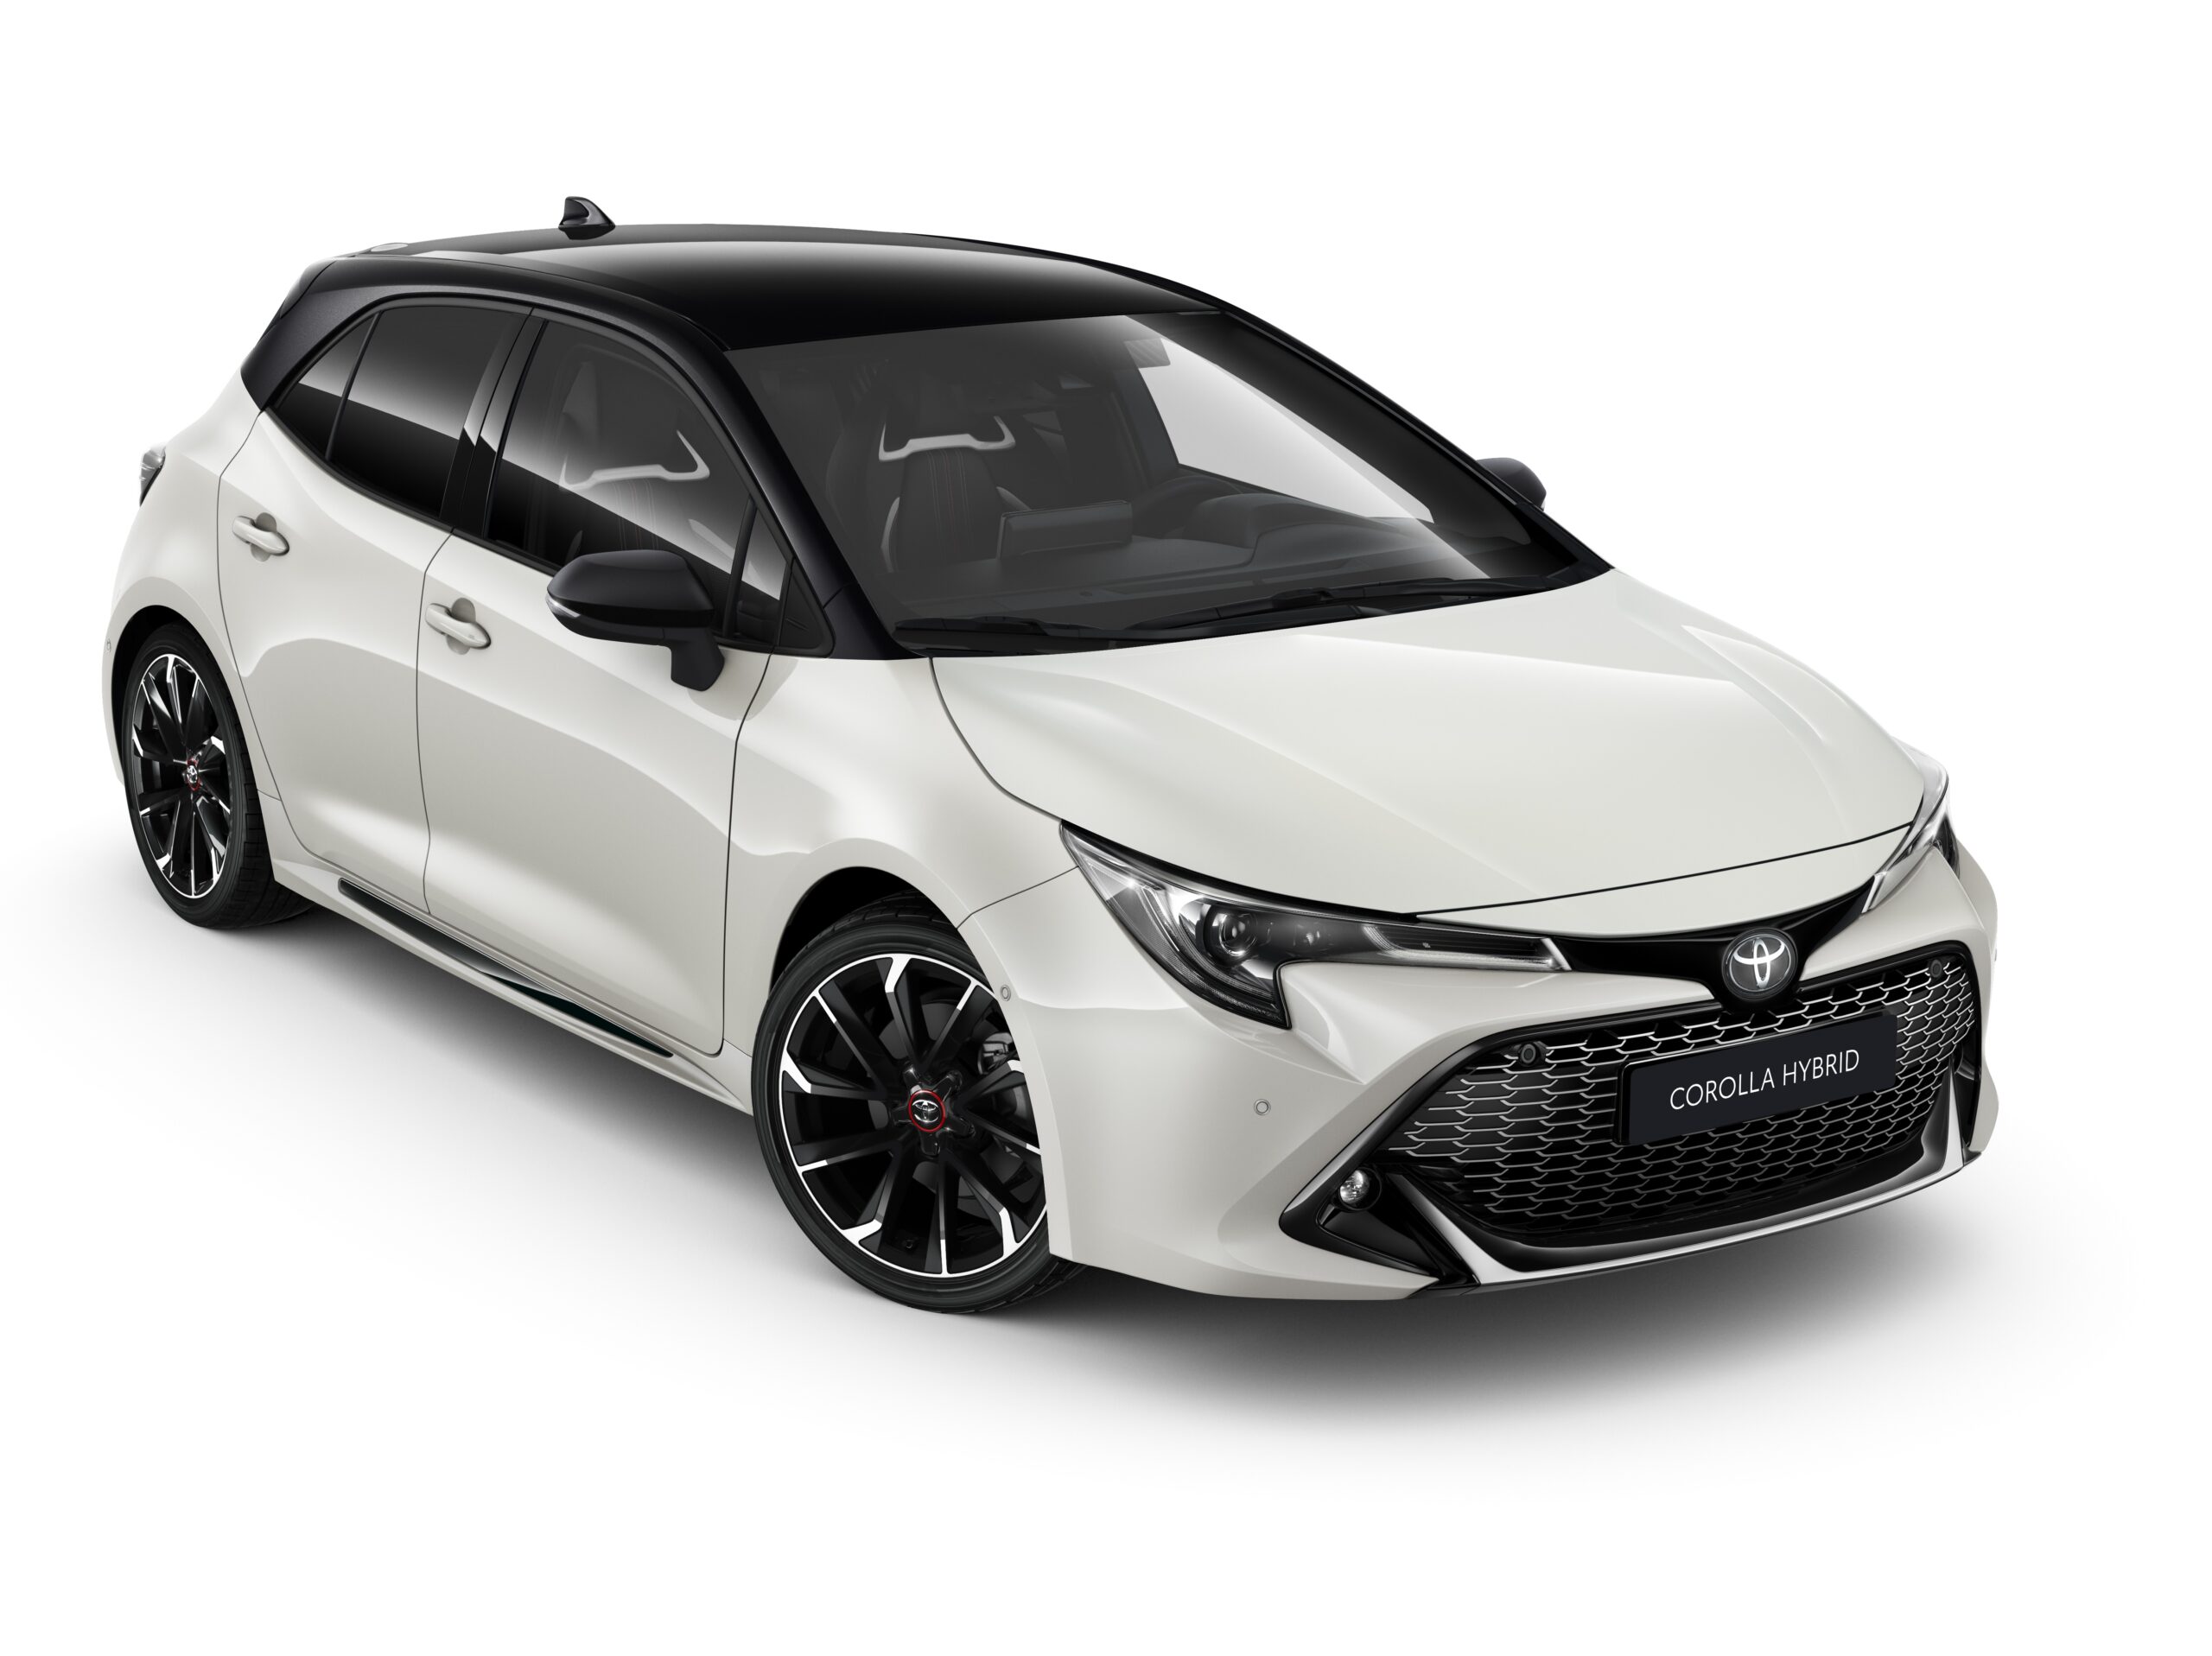 https://www.autosprint.ch/wp-content/uploads/2022/01/Toyota_Corolla_A_autosprint.ch_-scaled.jpg